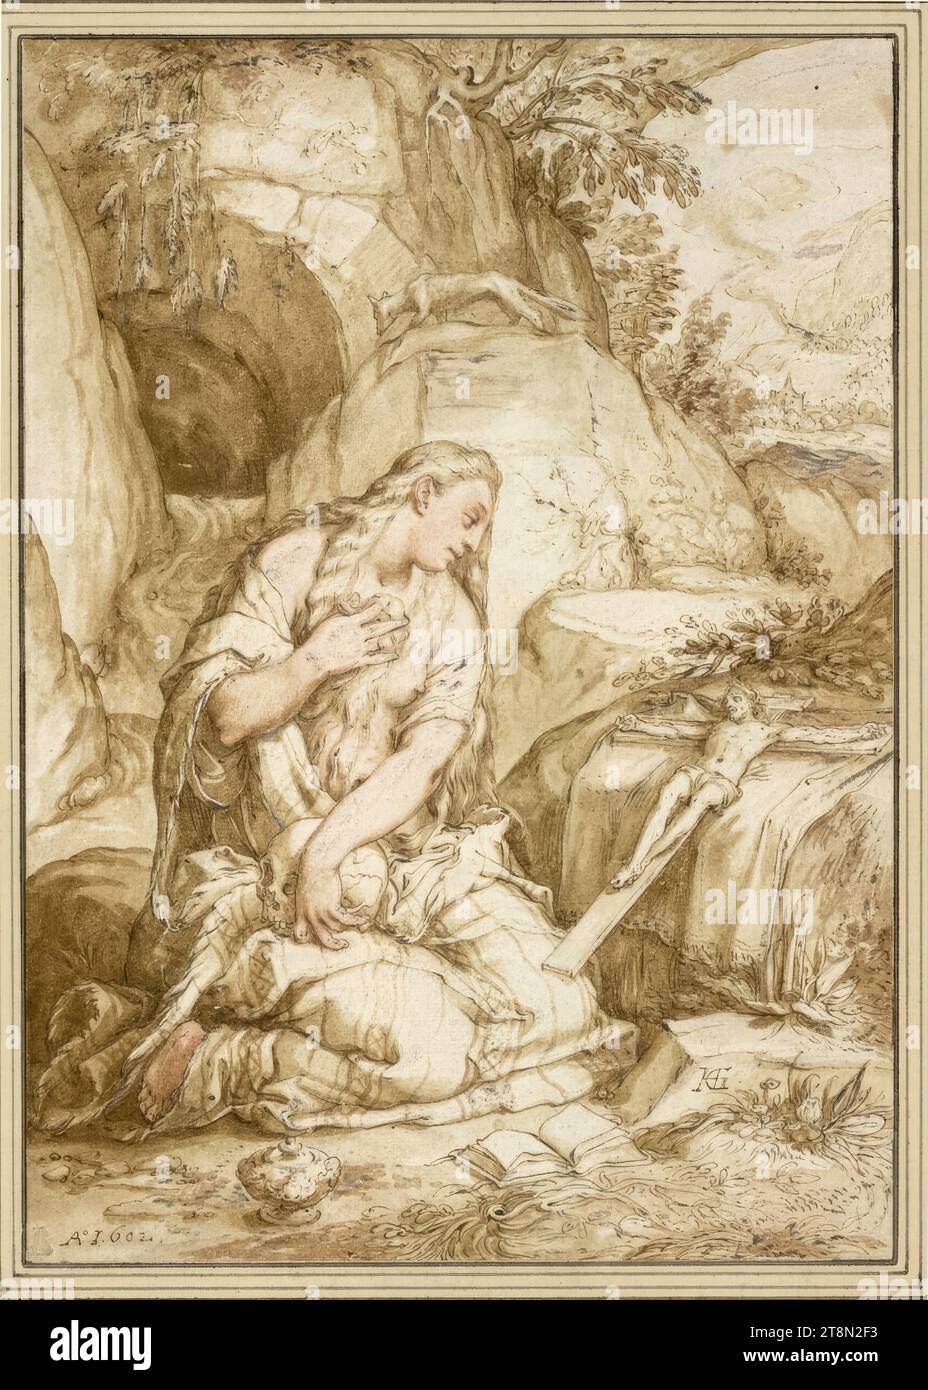 The penitent Magdalena, Hendrick Goltzius (Bracht near Venlo 1558 - 1617 Haarlem), 1602, drawing, pen and ink in brown and black, brown and reddish wash, heightened with white, 25.9 x 18.4 cm, l. and Duke Albert of Saxe-Teschen Stock Photo